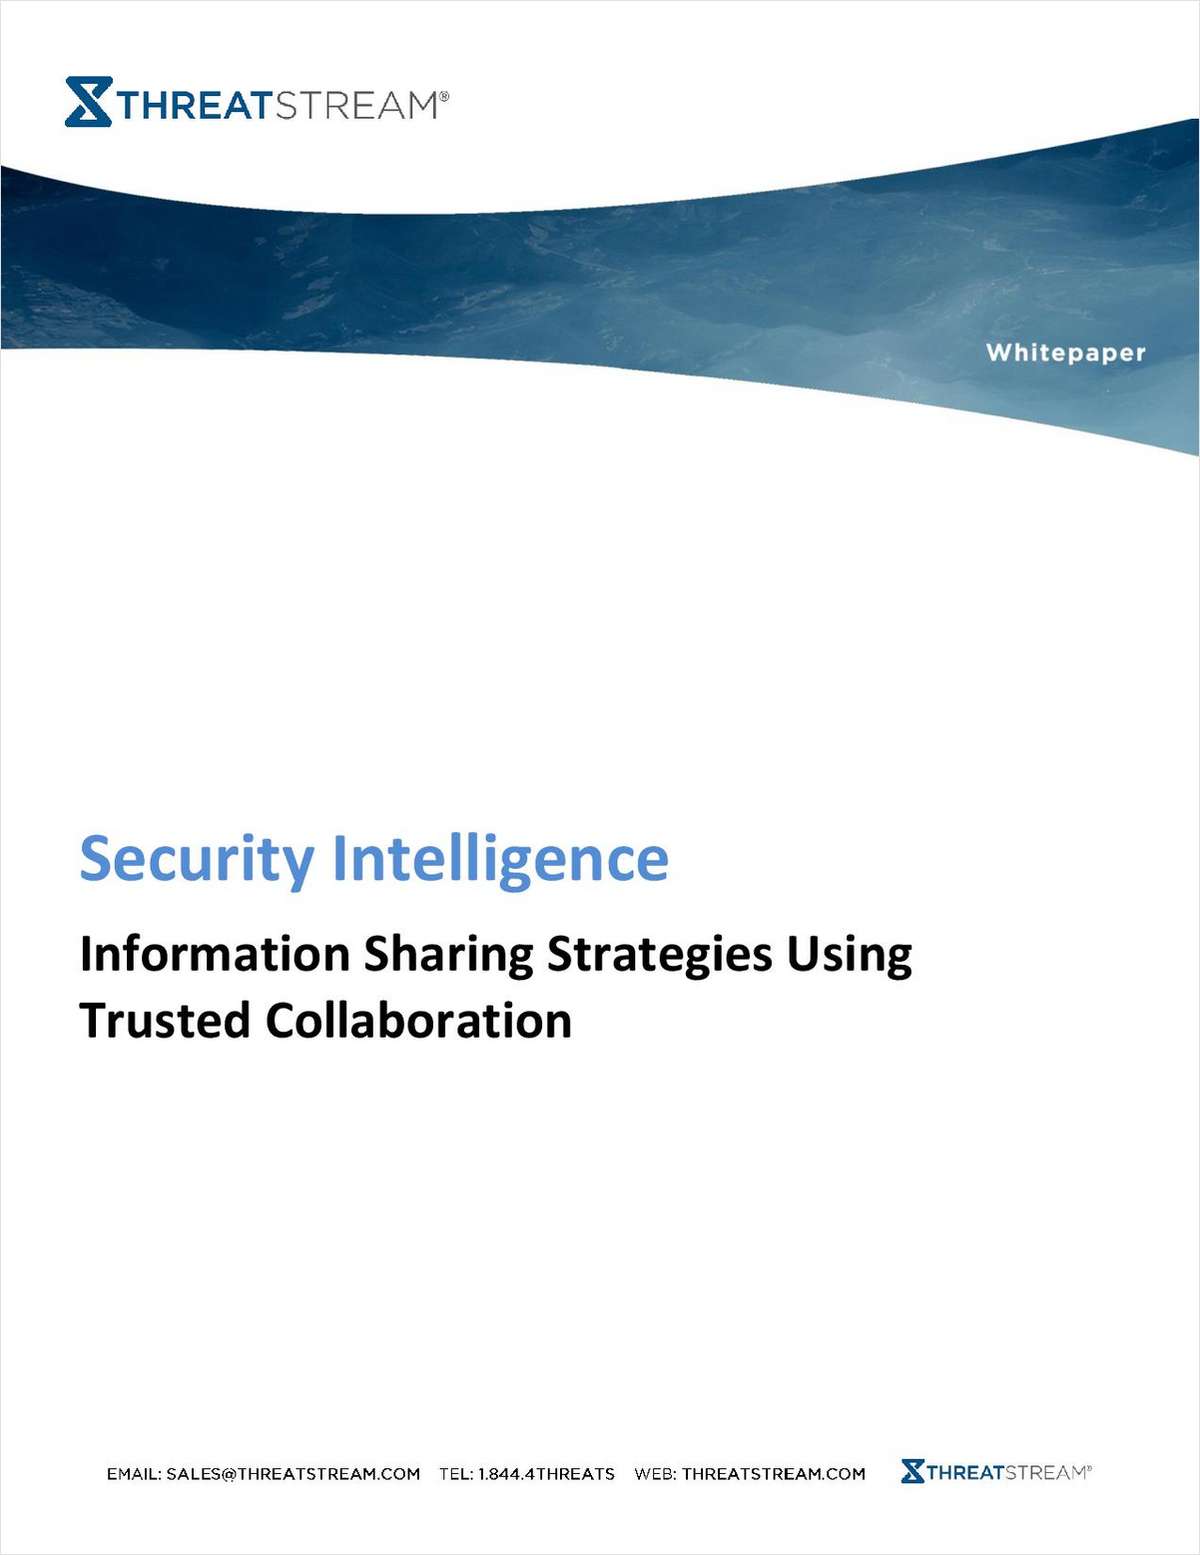 Security Intelligence: Information Sharing Strategies Using Trusted Collaboration